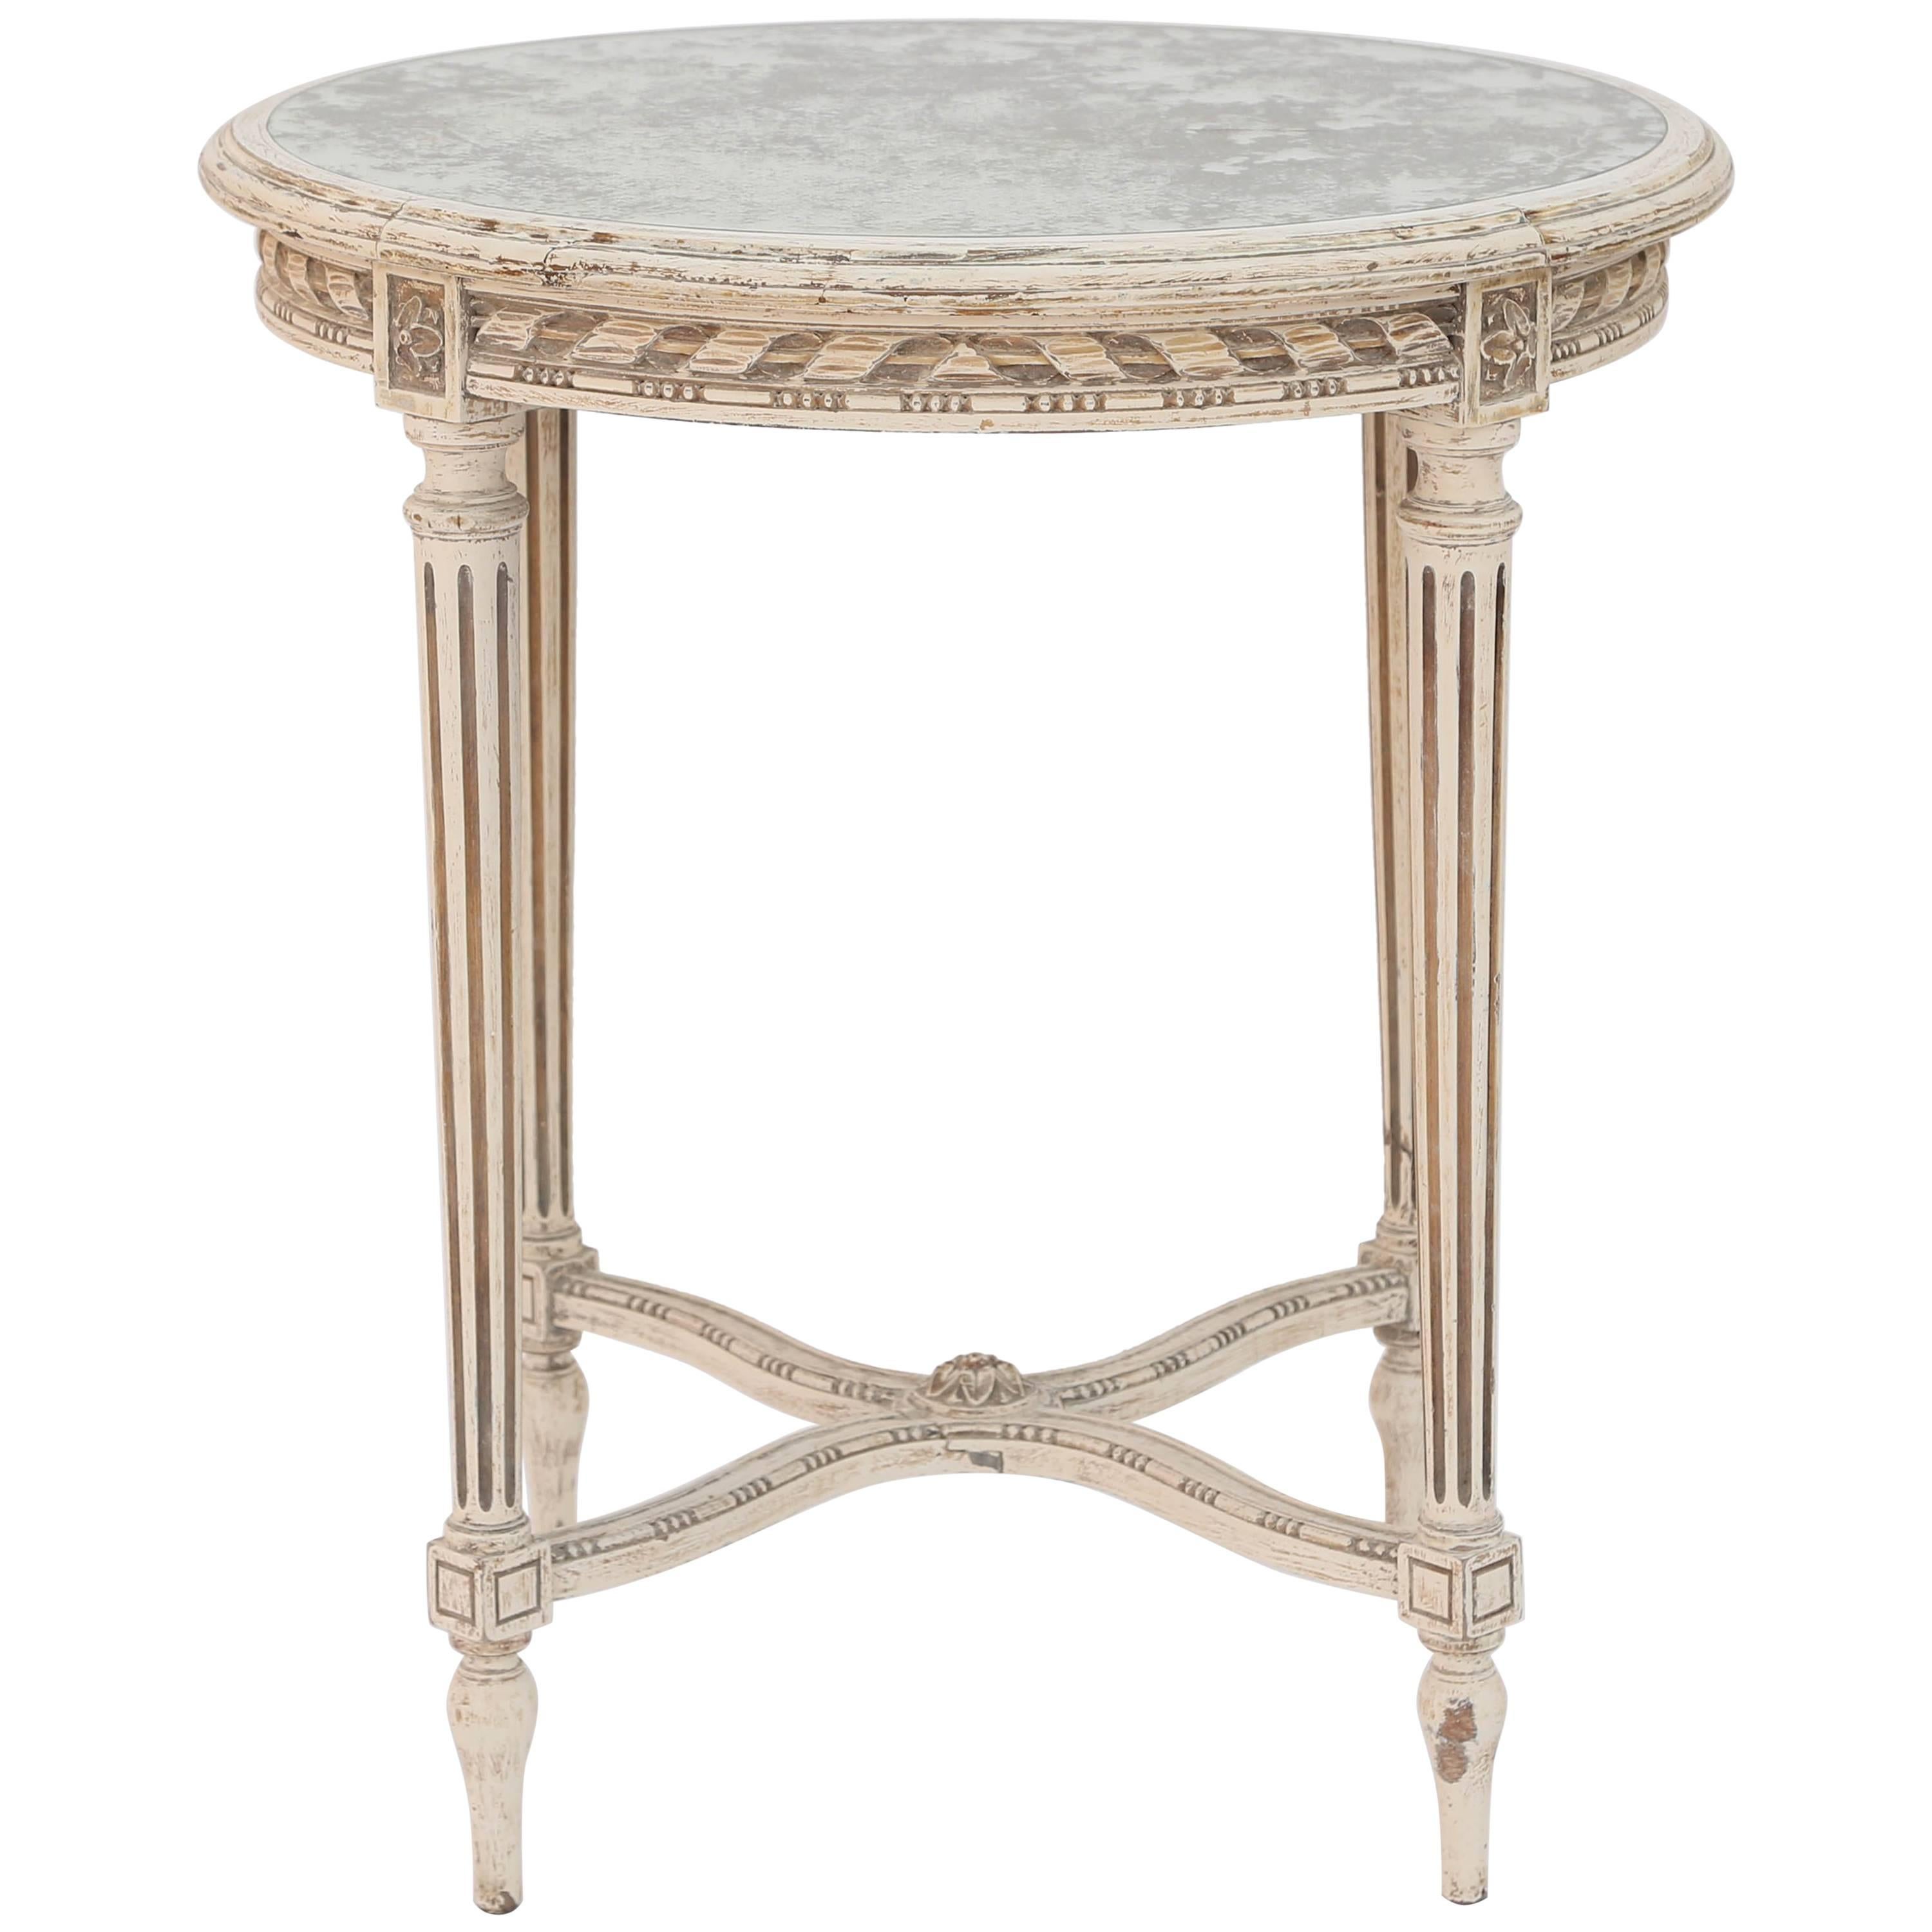 Louis XVI Style Painted Occasional Table with Mirrored Top